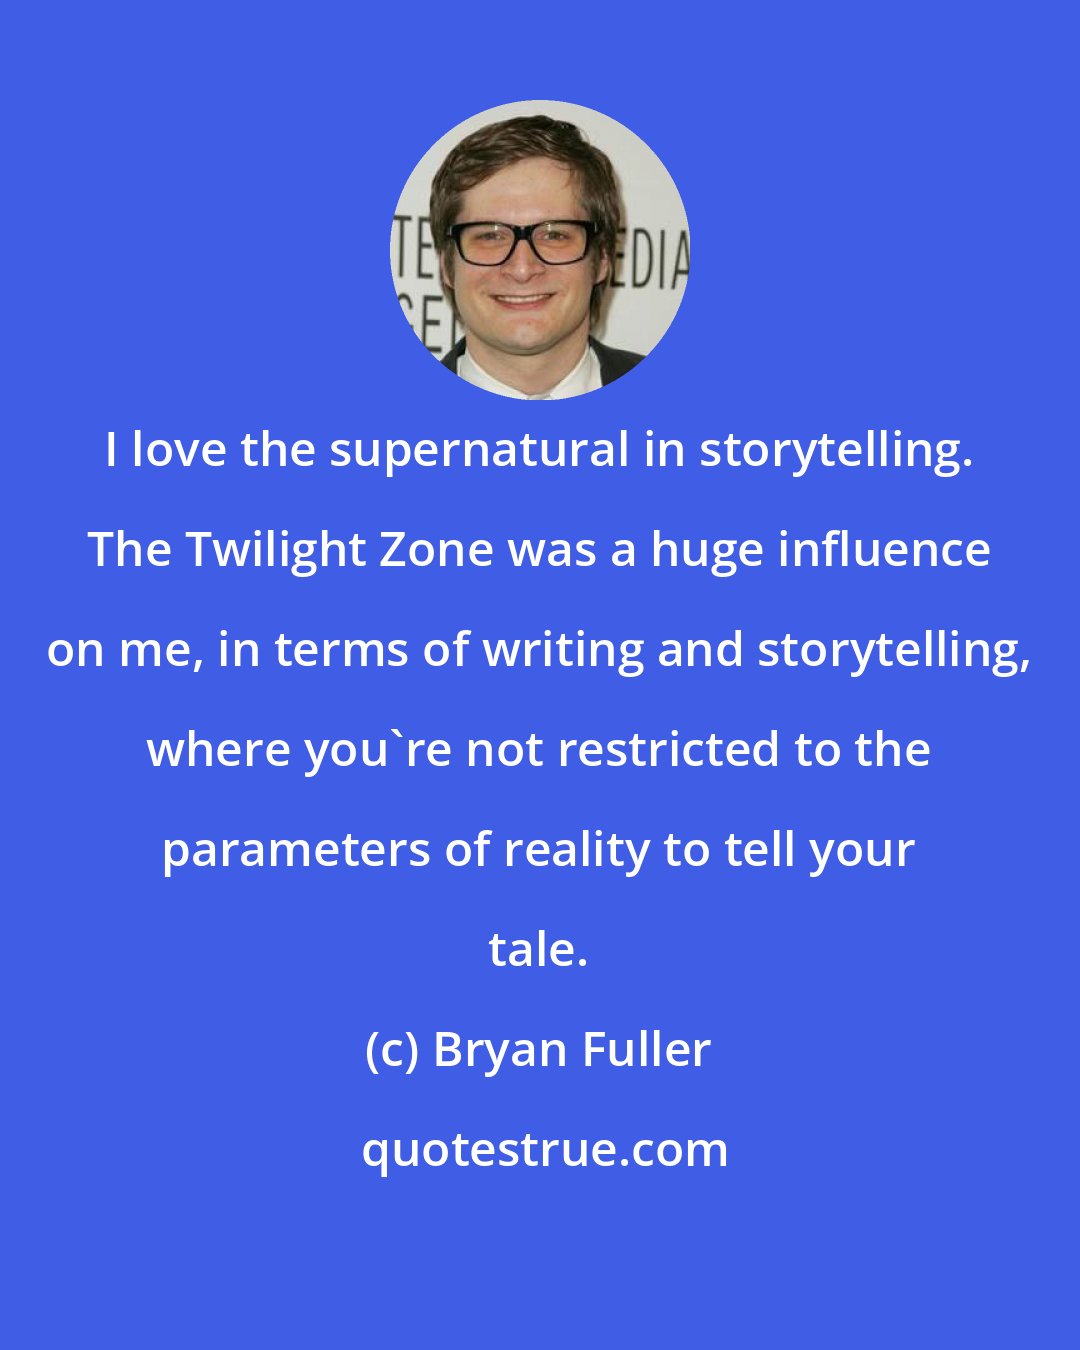 Bryan Fuller: I love the supernatural in storytelling. The Twilight Zone was a huge influence on me, in terms of writing and storytelling, where you're not restricted to the parameters of reality to tell your tale.